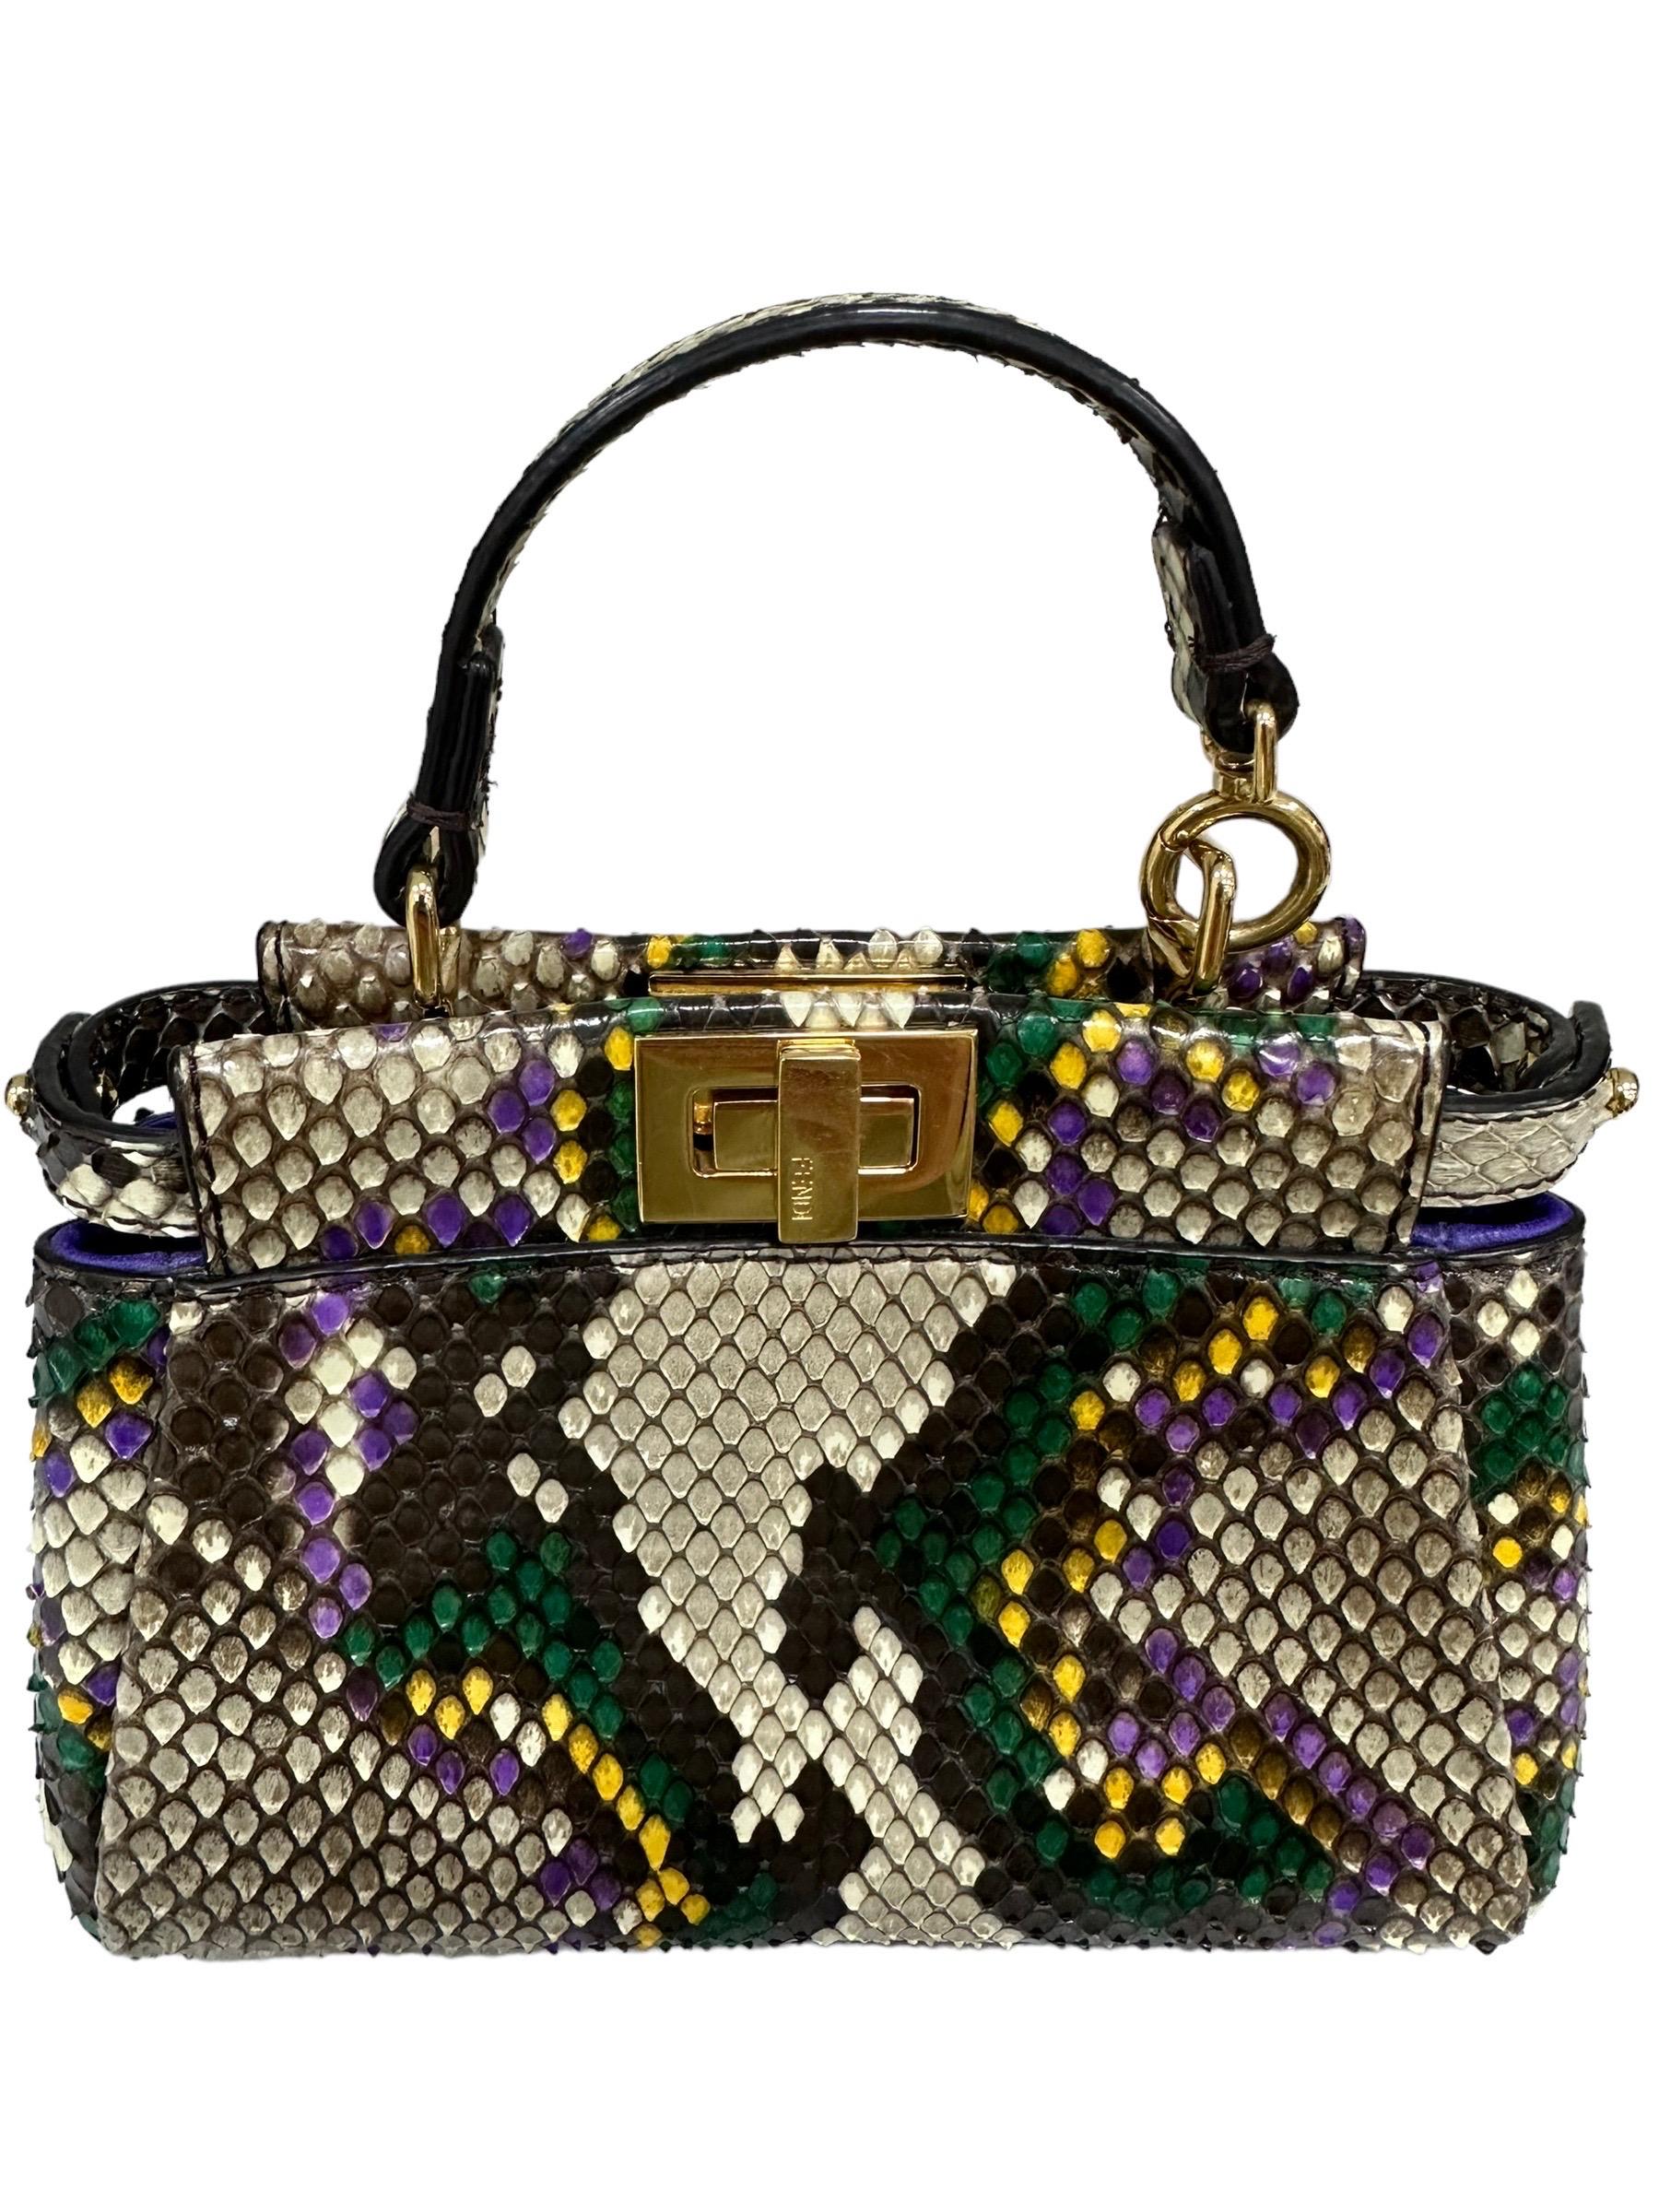 Bag by Fendi, Peekaboo line, IseeU model, size Micro, made of multicolor leather with gold hardware. Equipped with two openings with twist lock, internally covered in smooth purple leather, minimum capacity. Equipped with a central handle in rigid